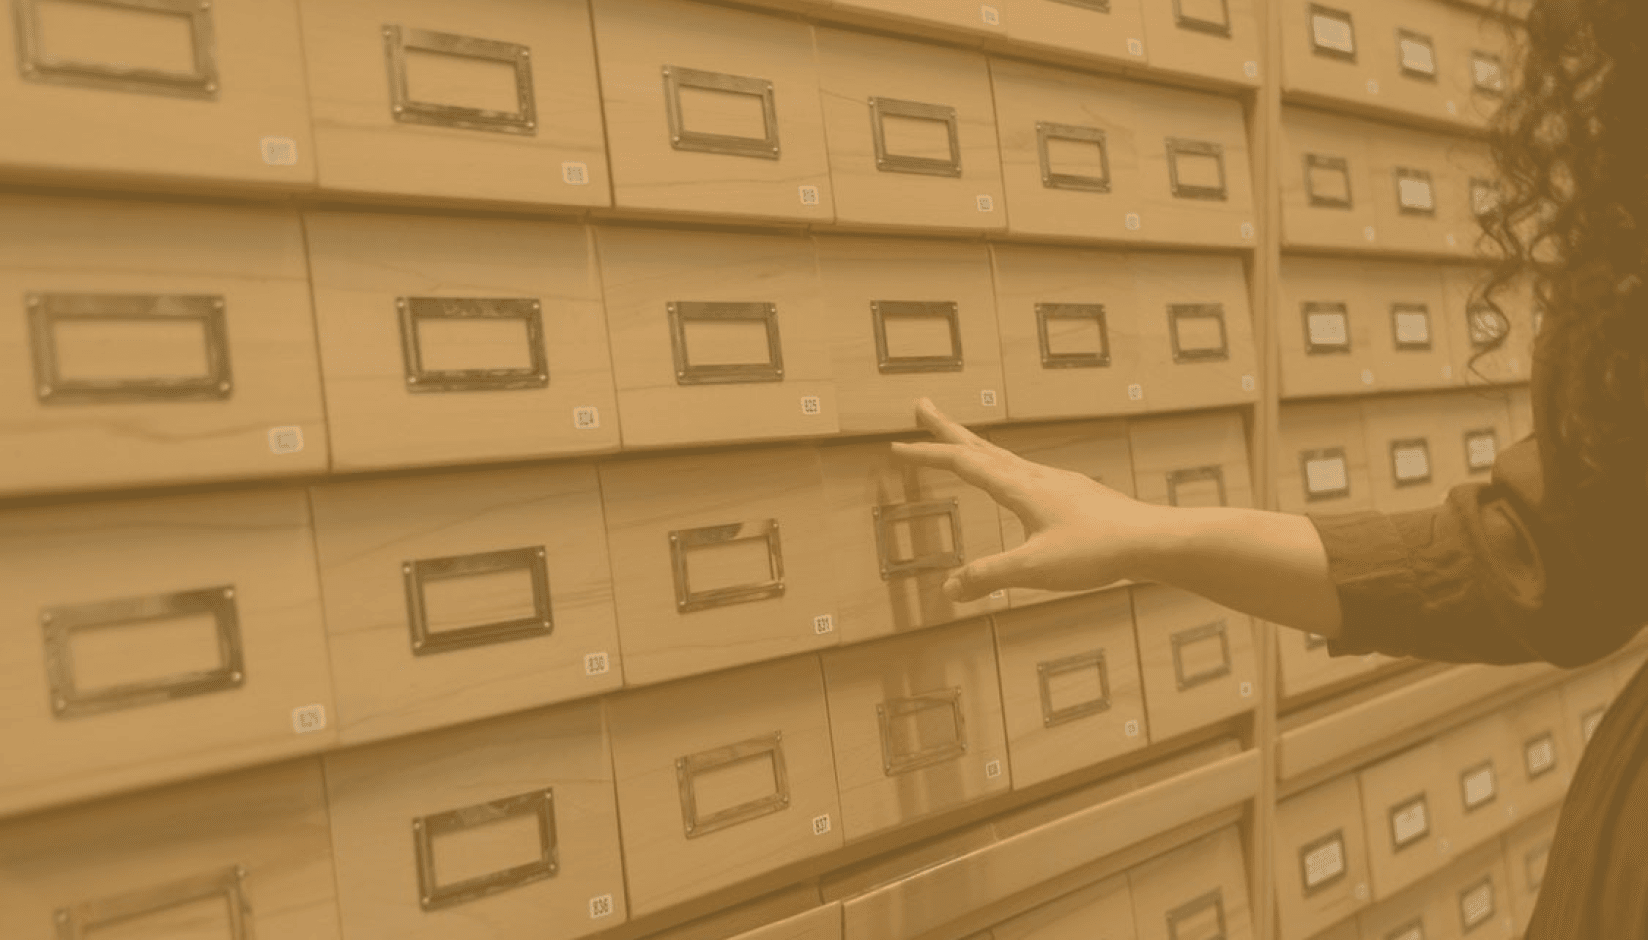 Mailboxes in a coworking space